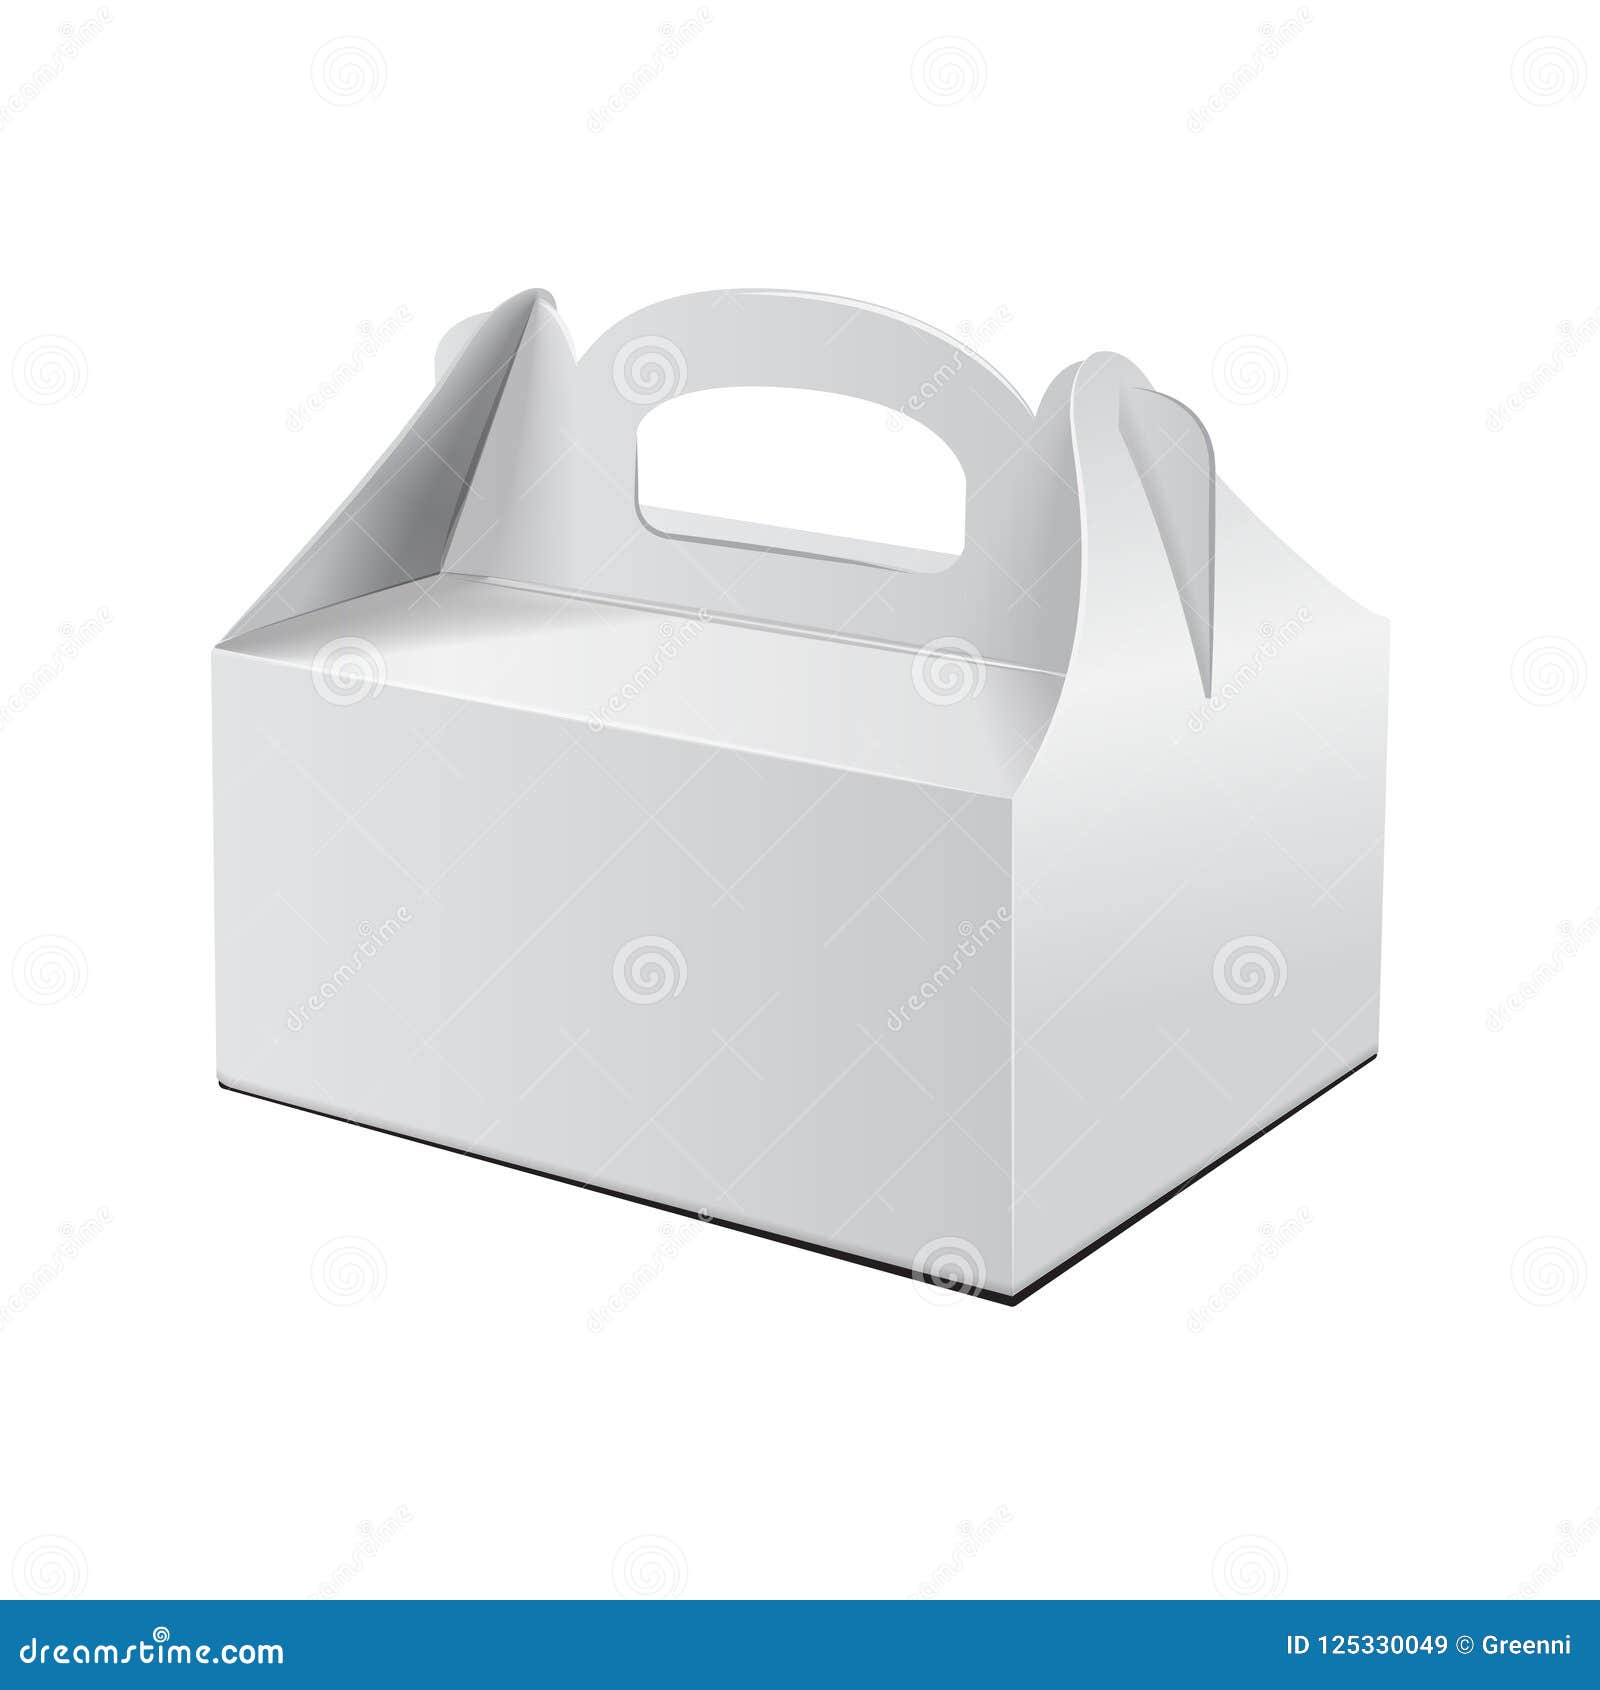 cake box. for fast food, gift, etc. carry packaging.  mockup. white template of cardboard package